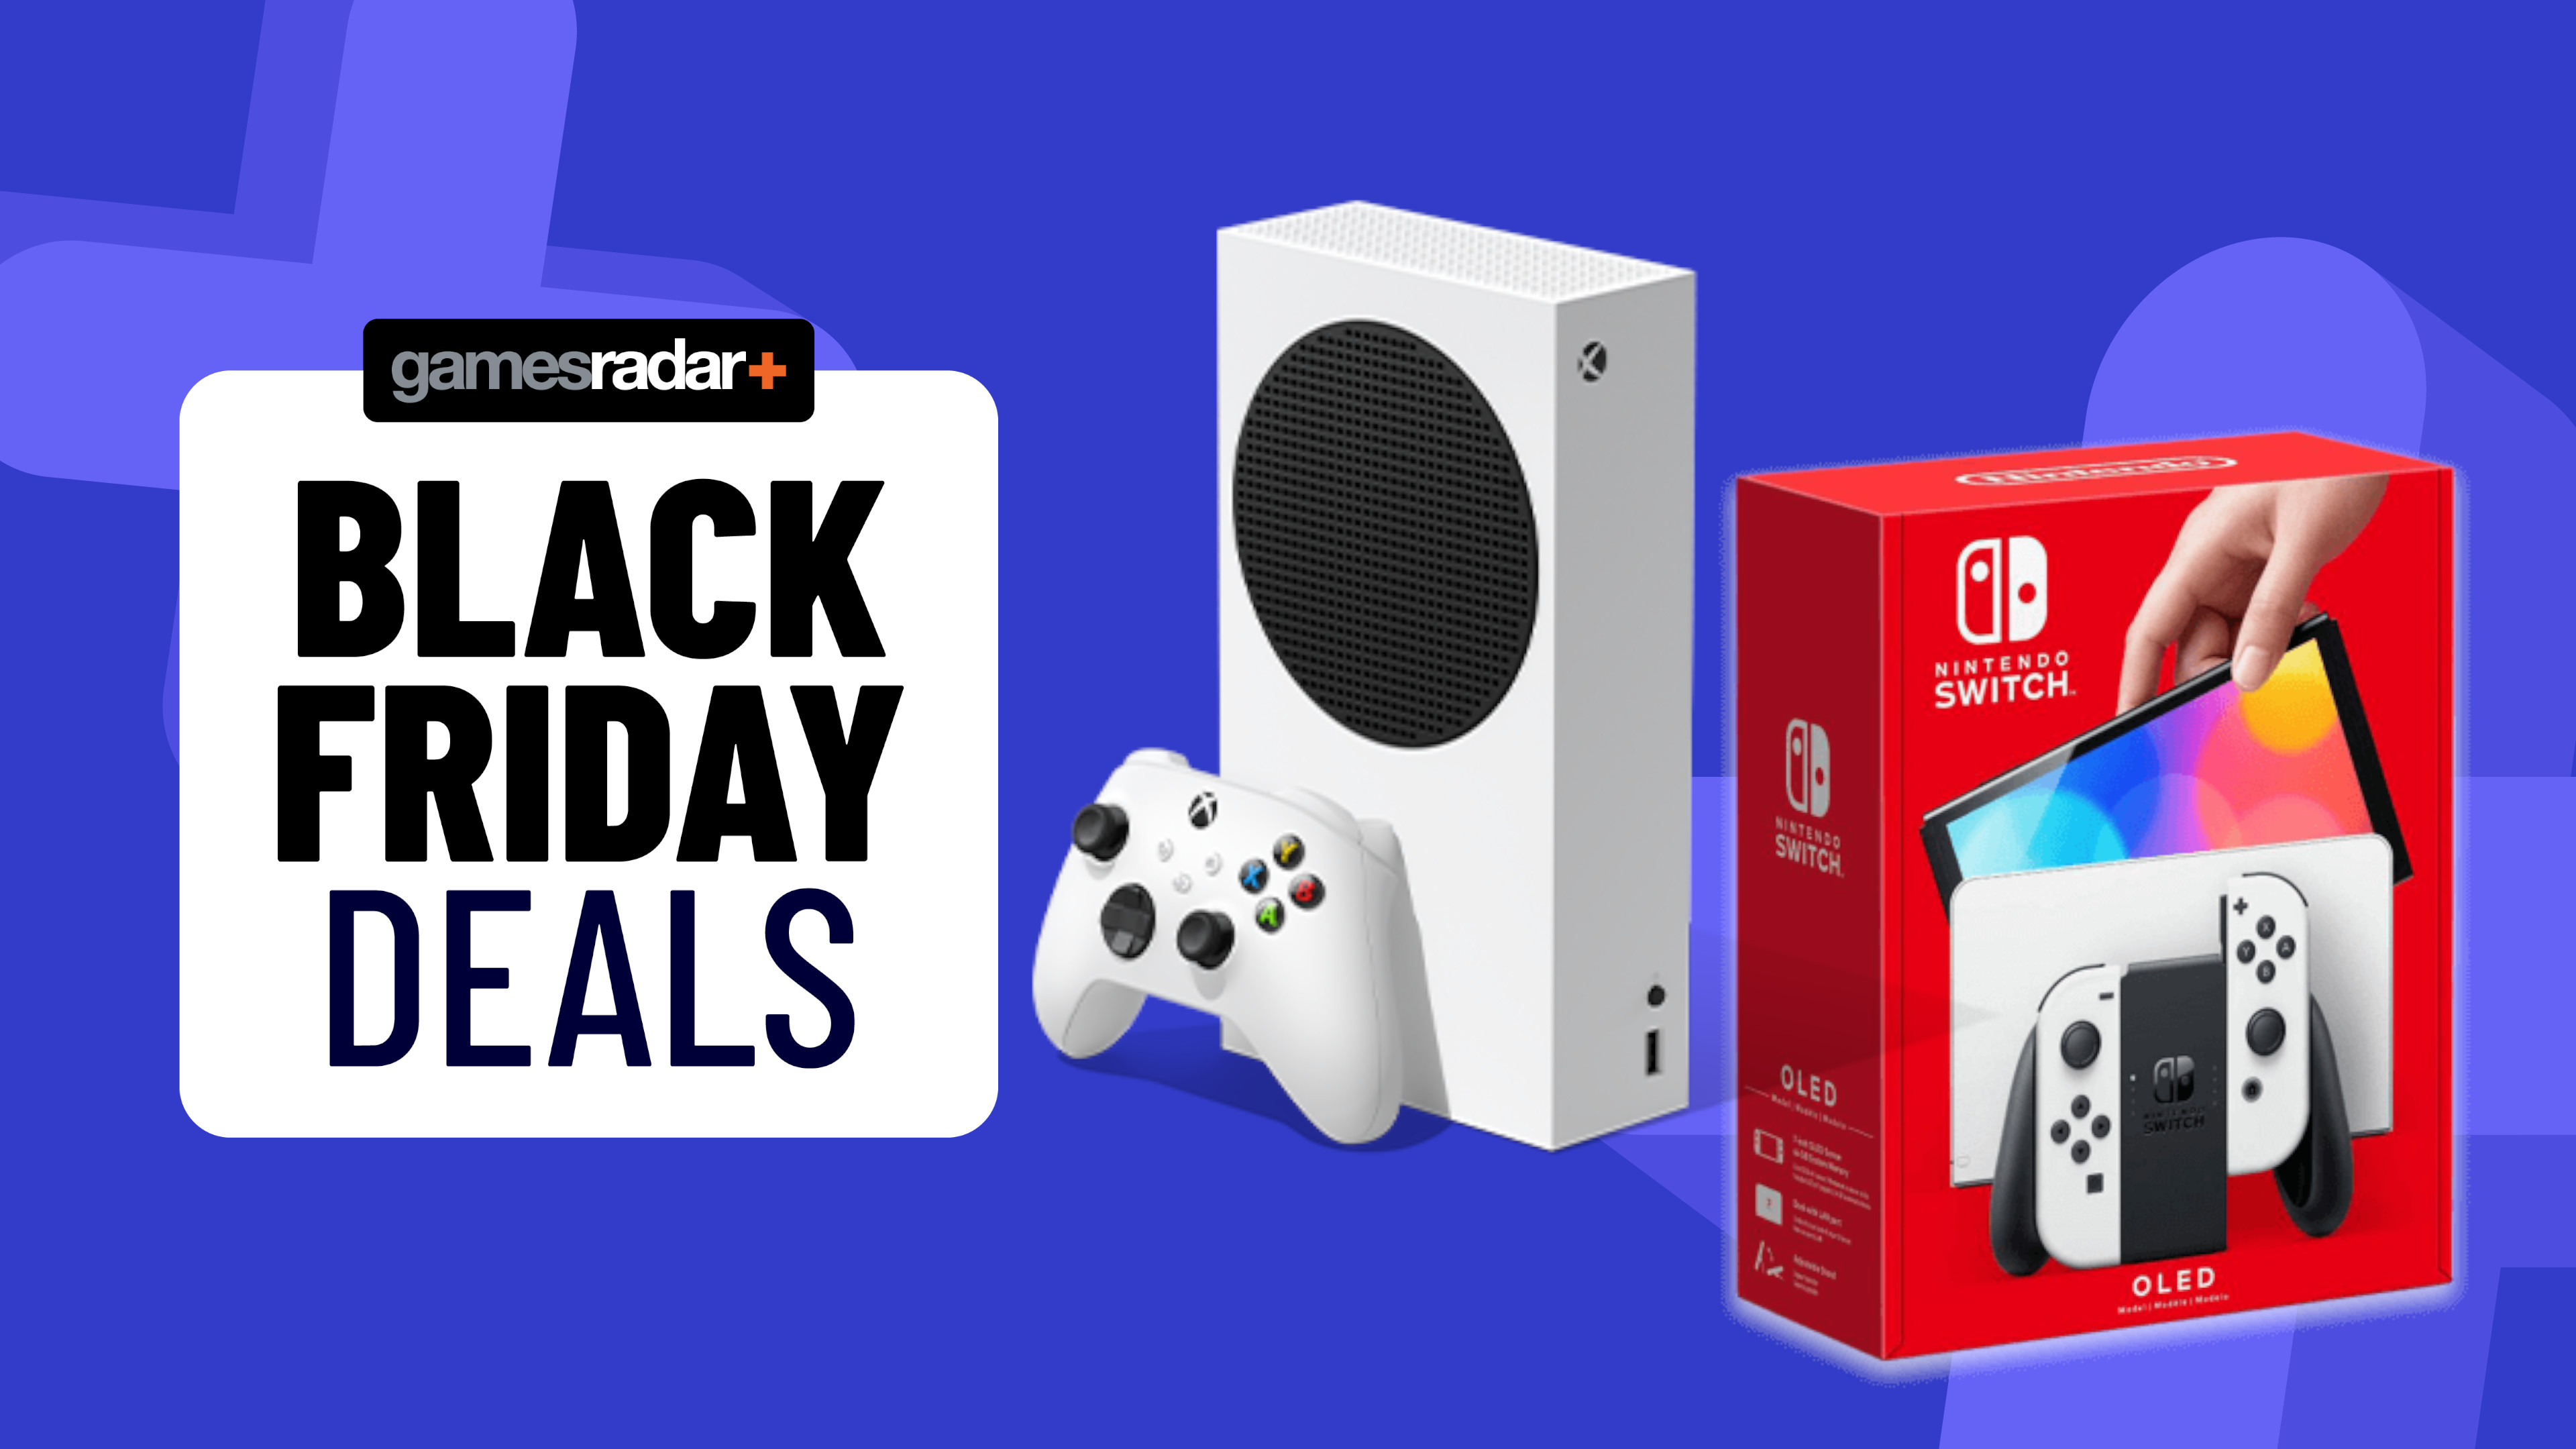 Hurry - Nintendo Xbox S hit record low prices in Woot Black Friday deals | GamesRadar+